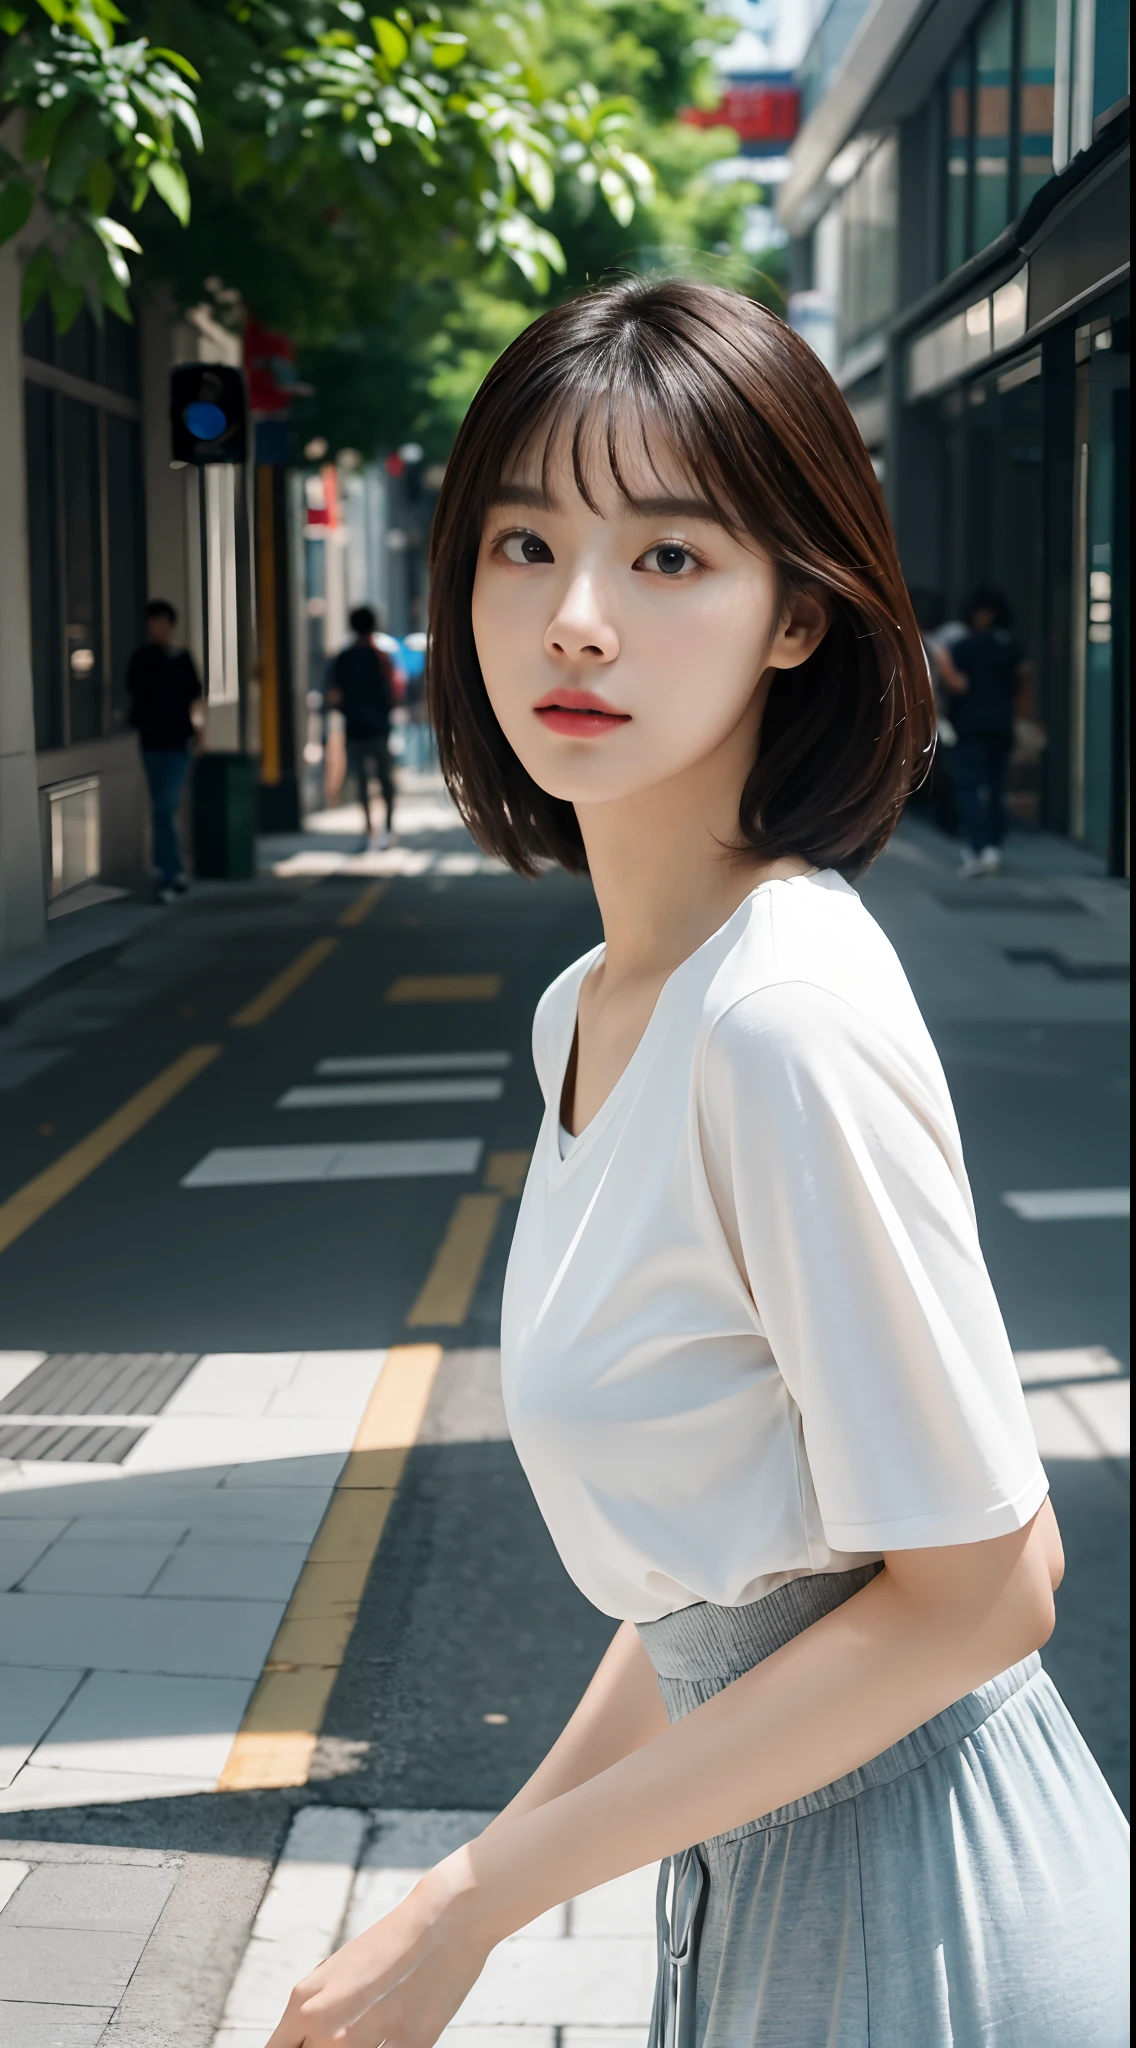 ((high quality, masterpiece:1.4)), 1girl, ((elegant, majestic, beautiful, korean, upper body, street clothes:1.4, pretty face, noon, street background:1.2)), absurdres, high details, intricate, intricate details, sharp focus, screen space reflextions, RTX, edge lighting, rim light, rim lighting, best lighting, 8K, HD, Full-HD, Ultra-HD, Super-Resolution, Megapixel, Refreshing, Lumen Reflections, TXAA, De-Noise, Shaders, Post Processing, Post-Production, insanely detailed and intricate, hypermaximalist, hyper realistic, super detailed